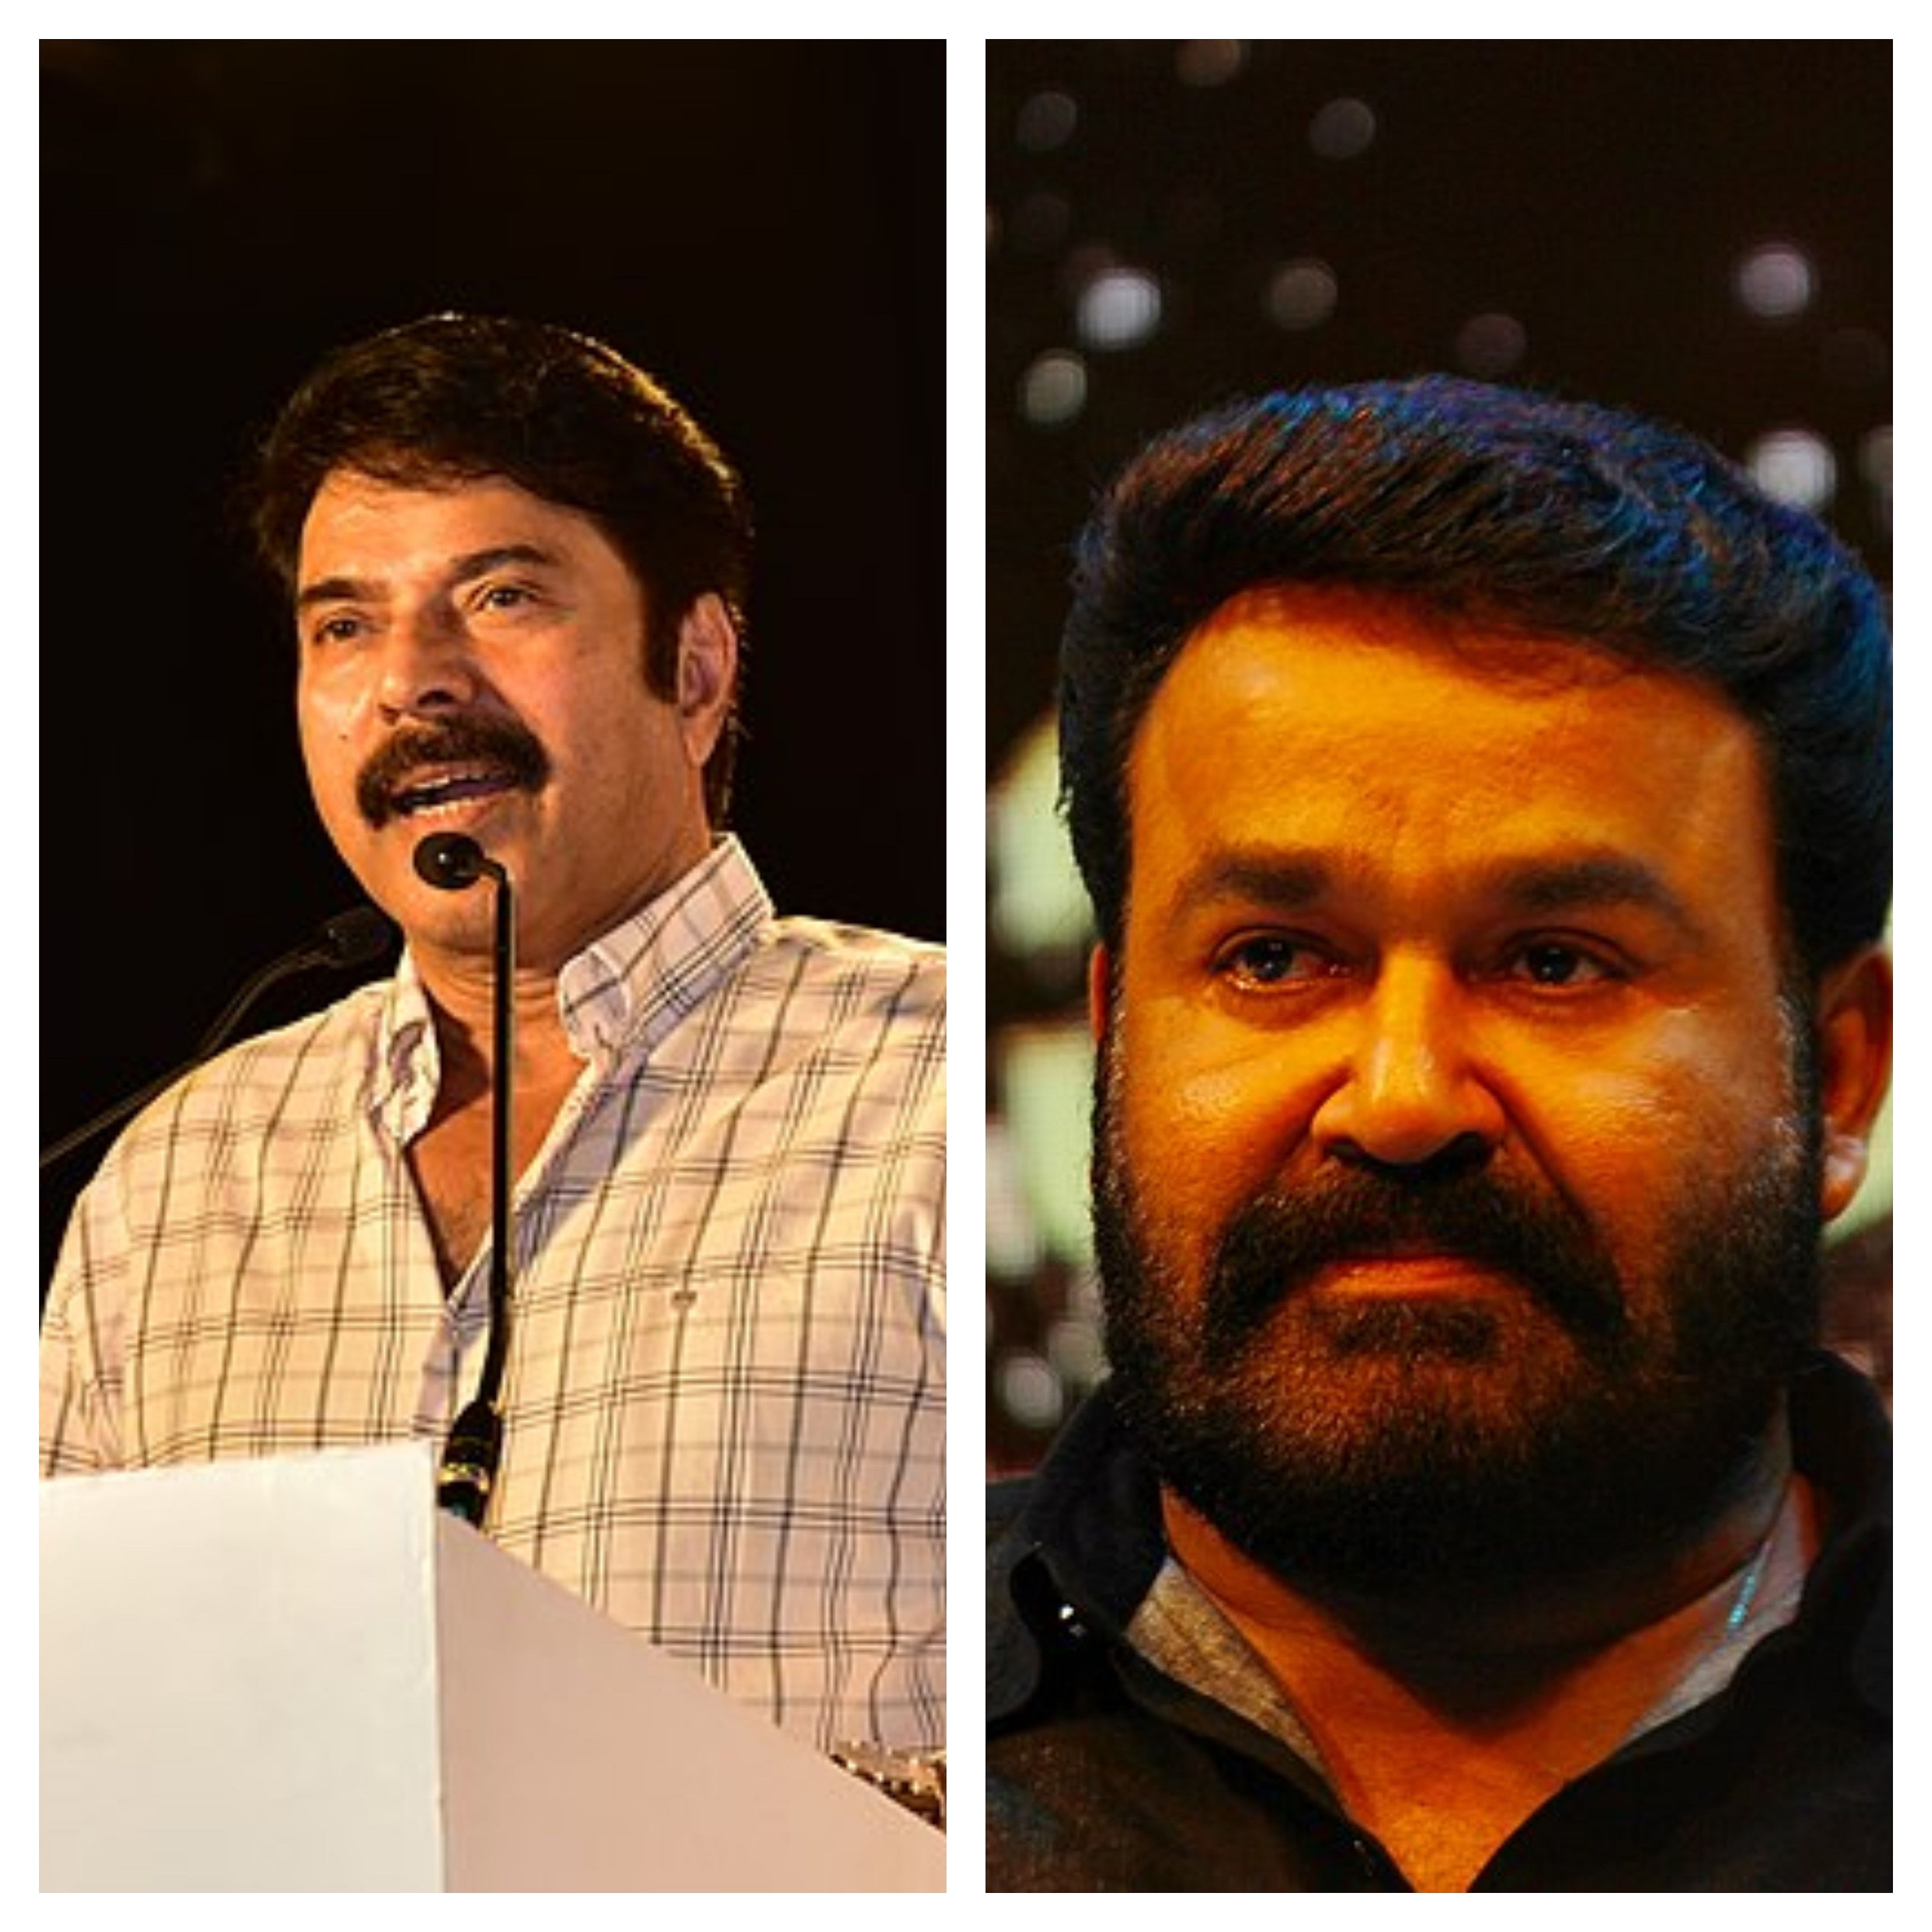 Mammootty and Mohanlal are the pillars of Malayalam cinema. (Credit:Wikimedia Commons)